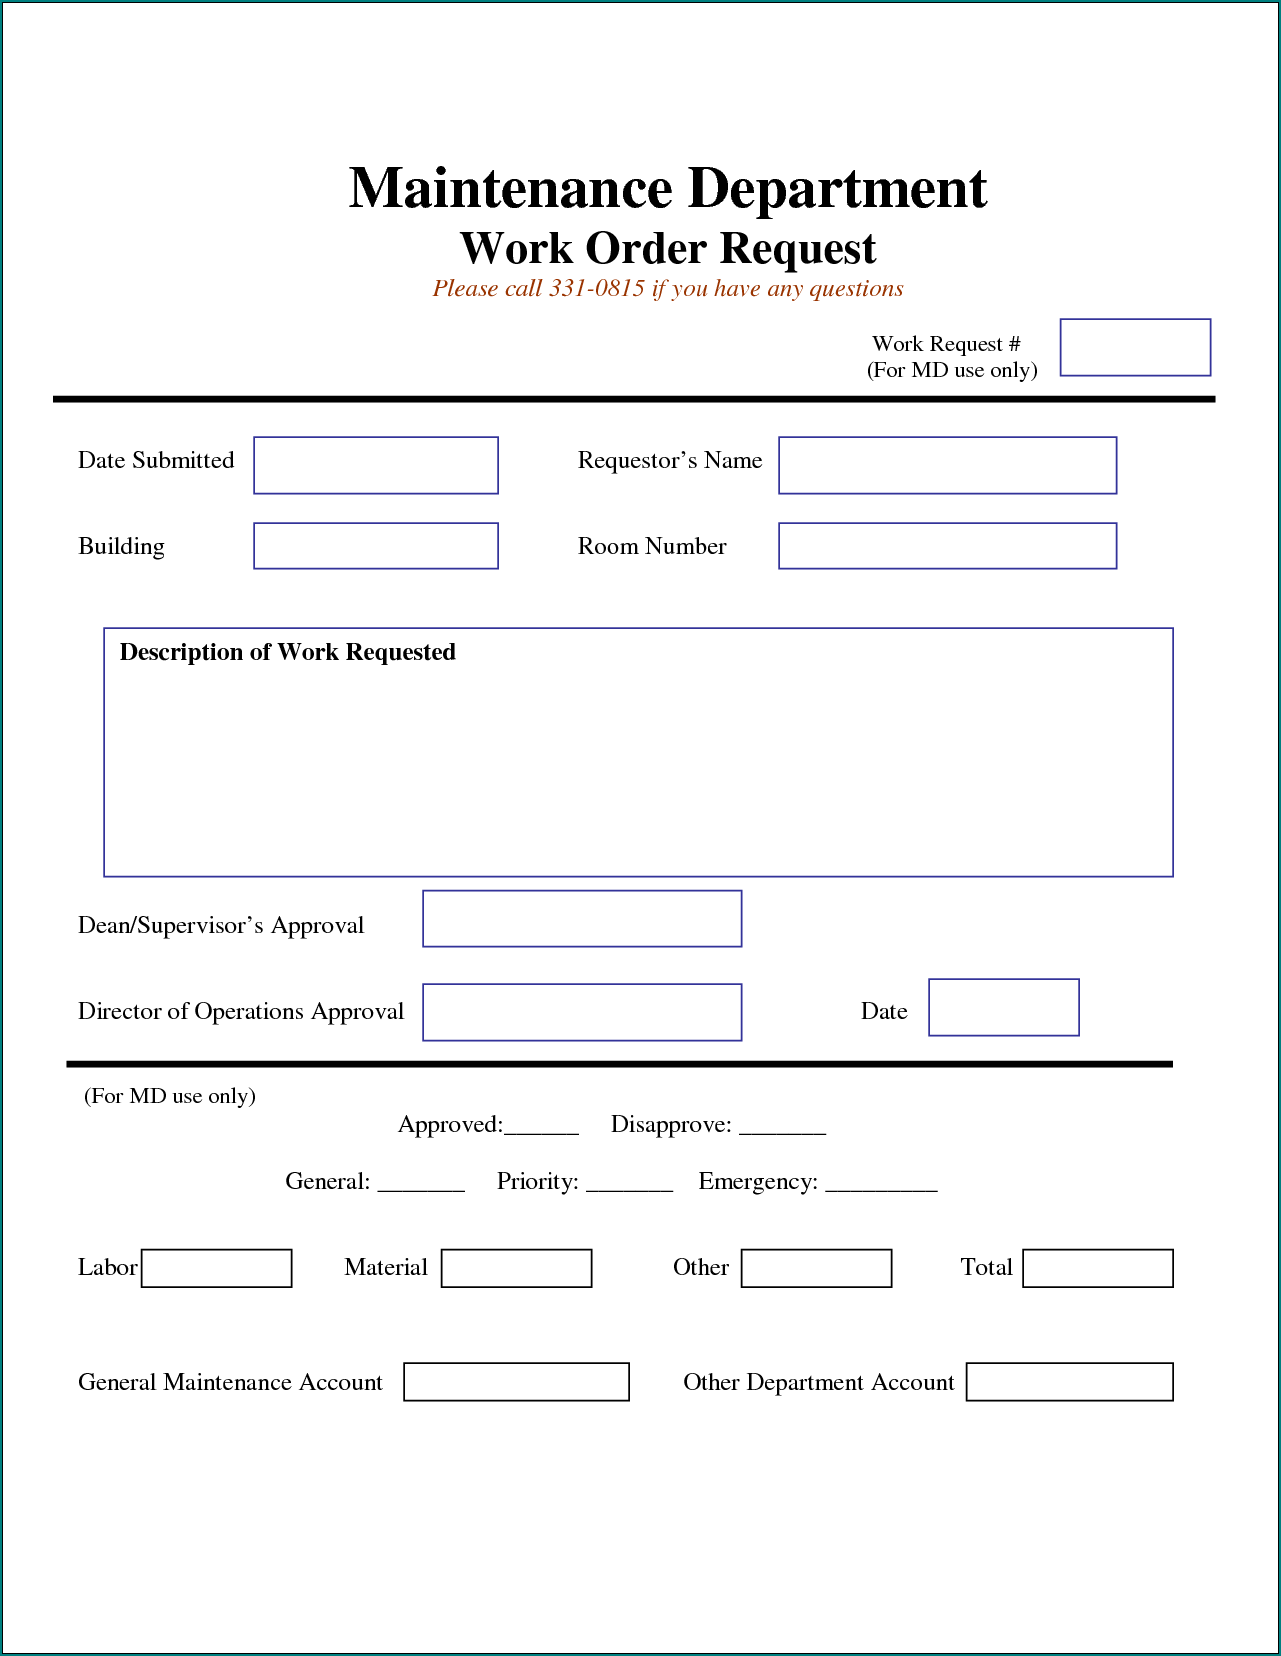 Example of Maintenance Work Order Form